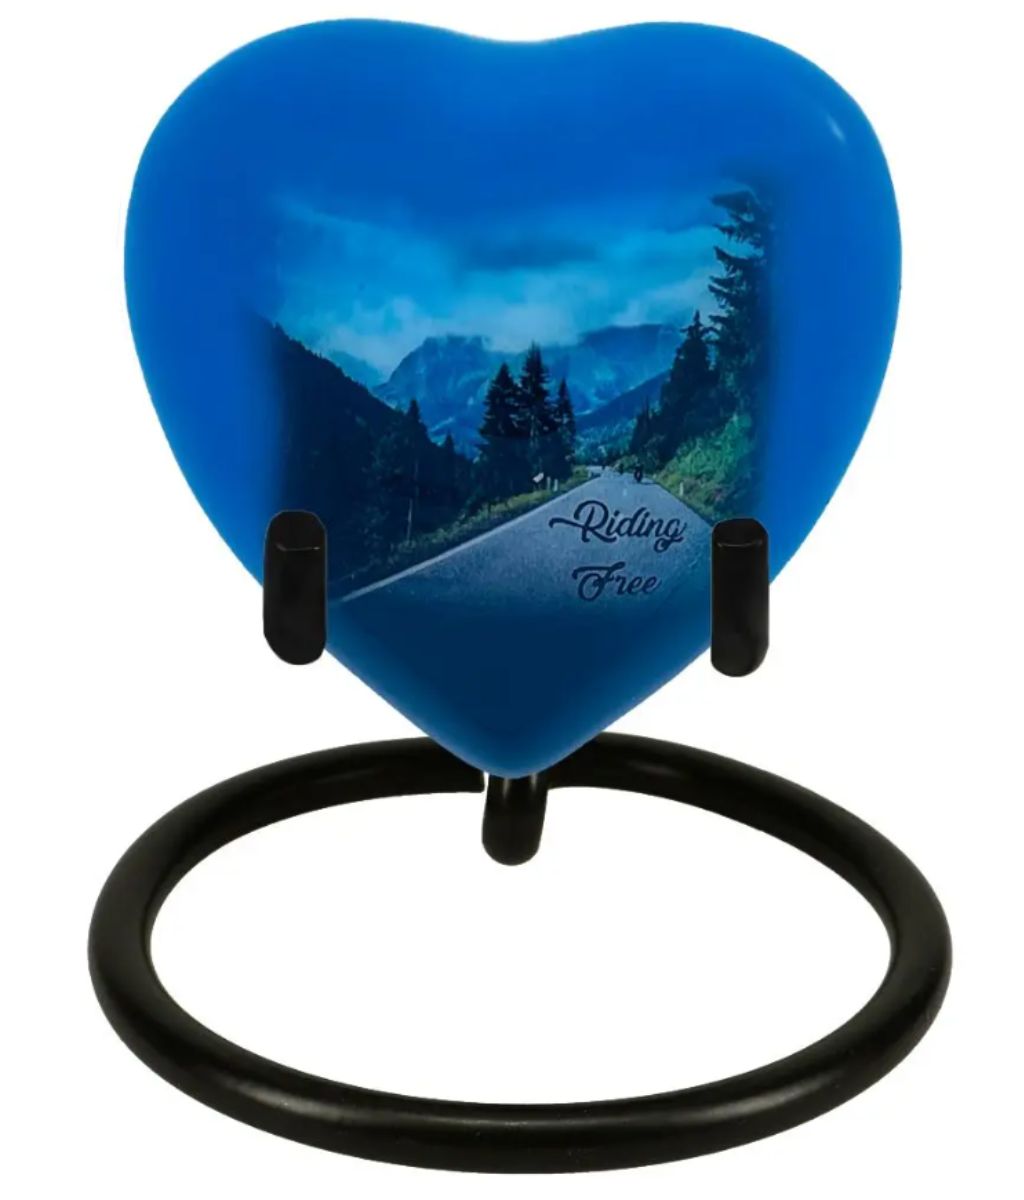 The Riding Free Heart Keepsake Urn - Stand Option shows several bikers riding through a mountain paradise. Perfect for dresser or night table, with a heart stand is an option.